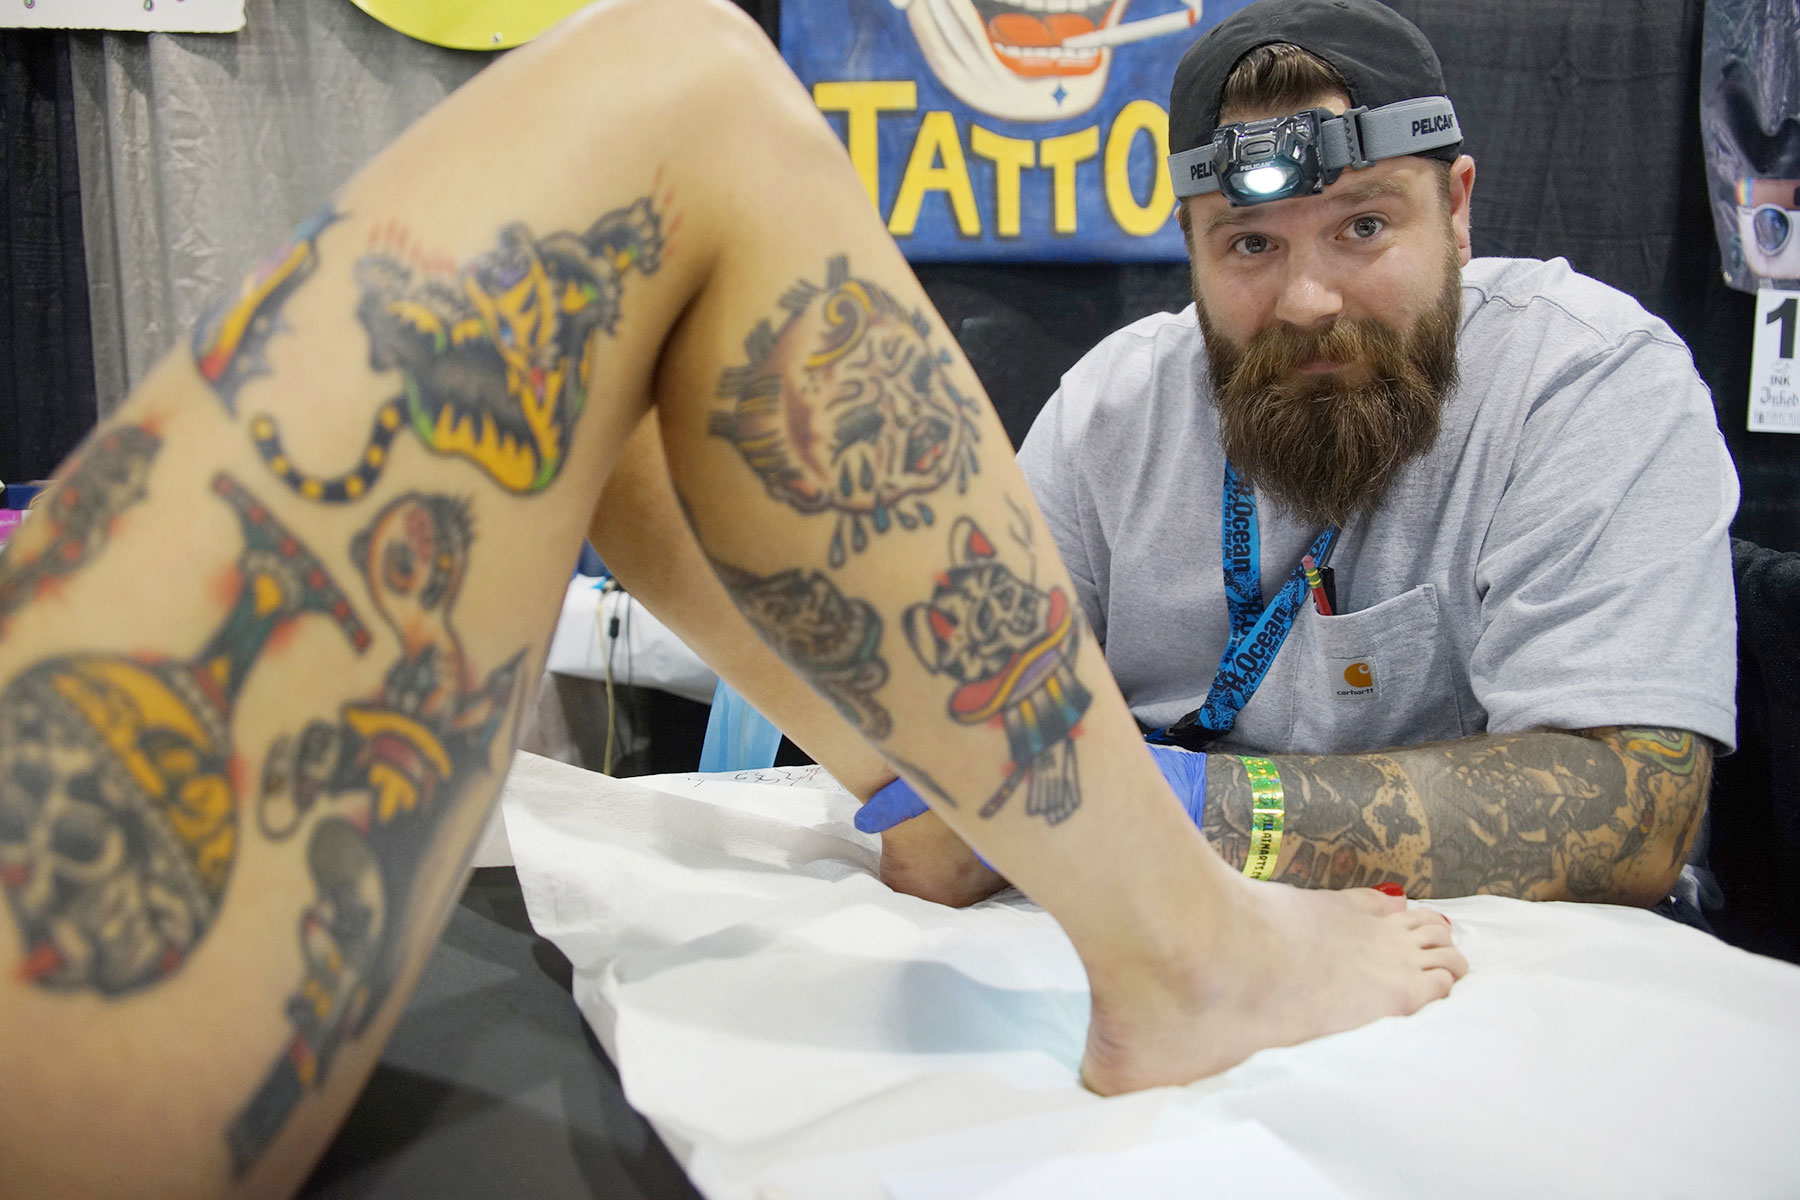 Tattoo enthusiasts gathered in Sydney for The Australian 